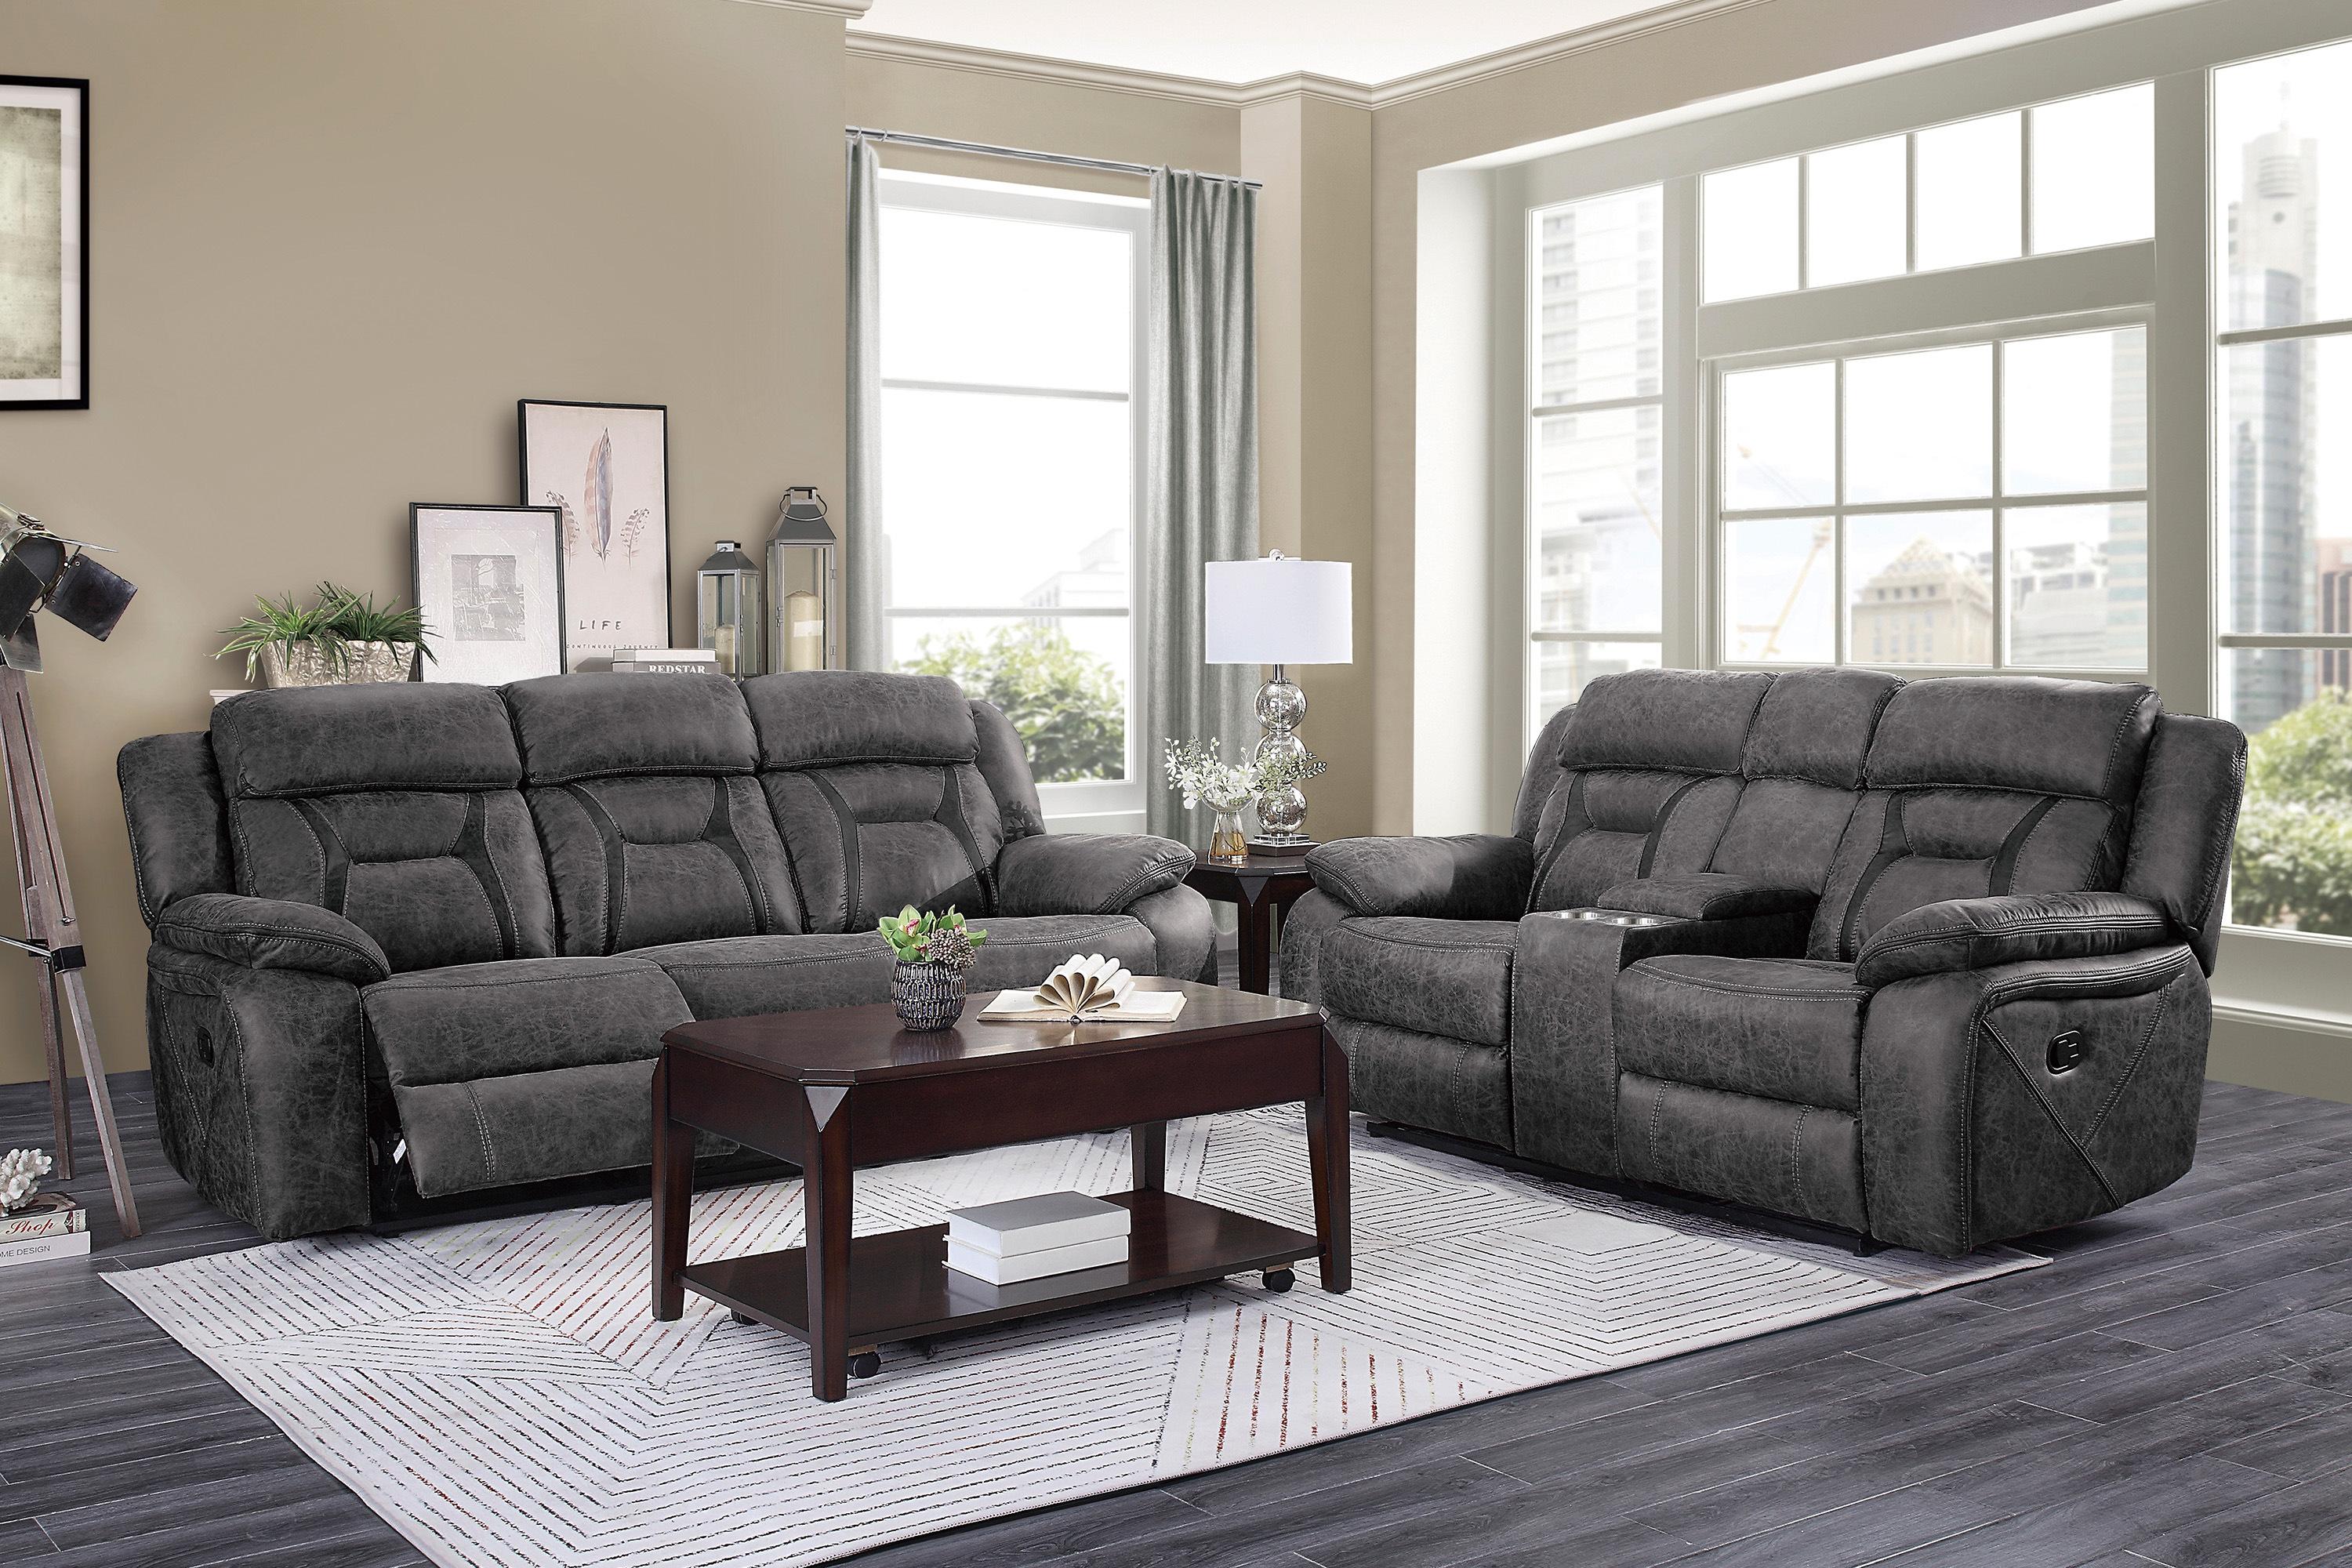 Modern Reclining Set 9989GY-2PC Madrona Hill 9989GY-2PC in Gray Microfiber